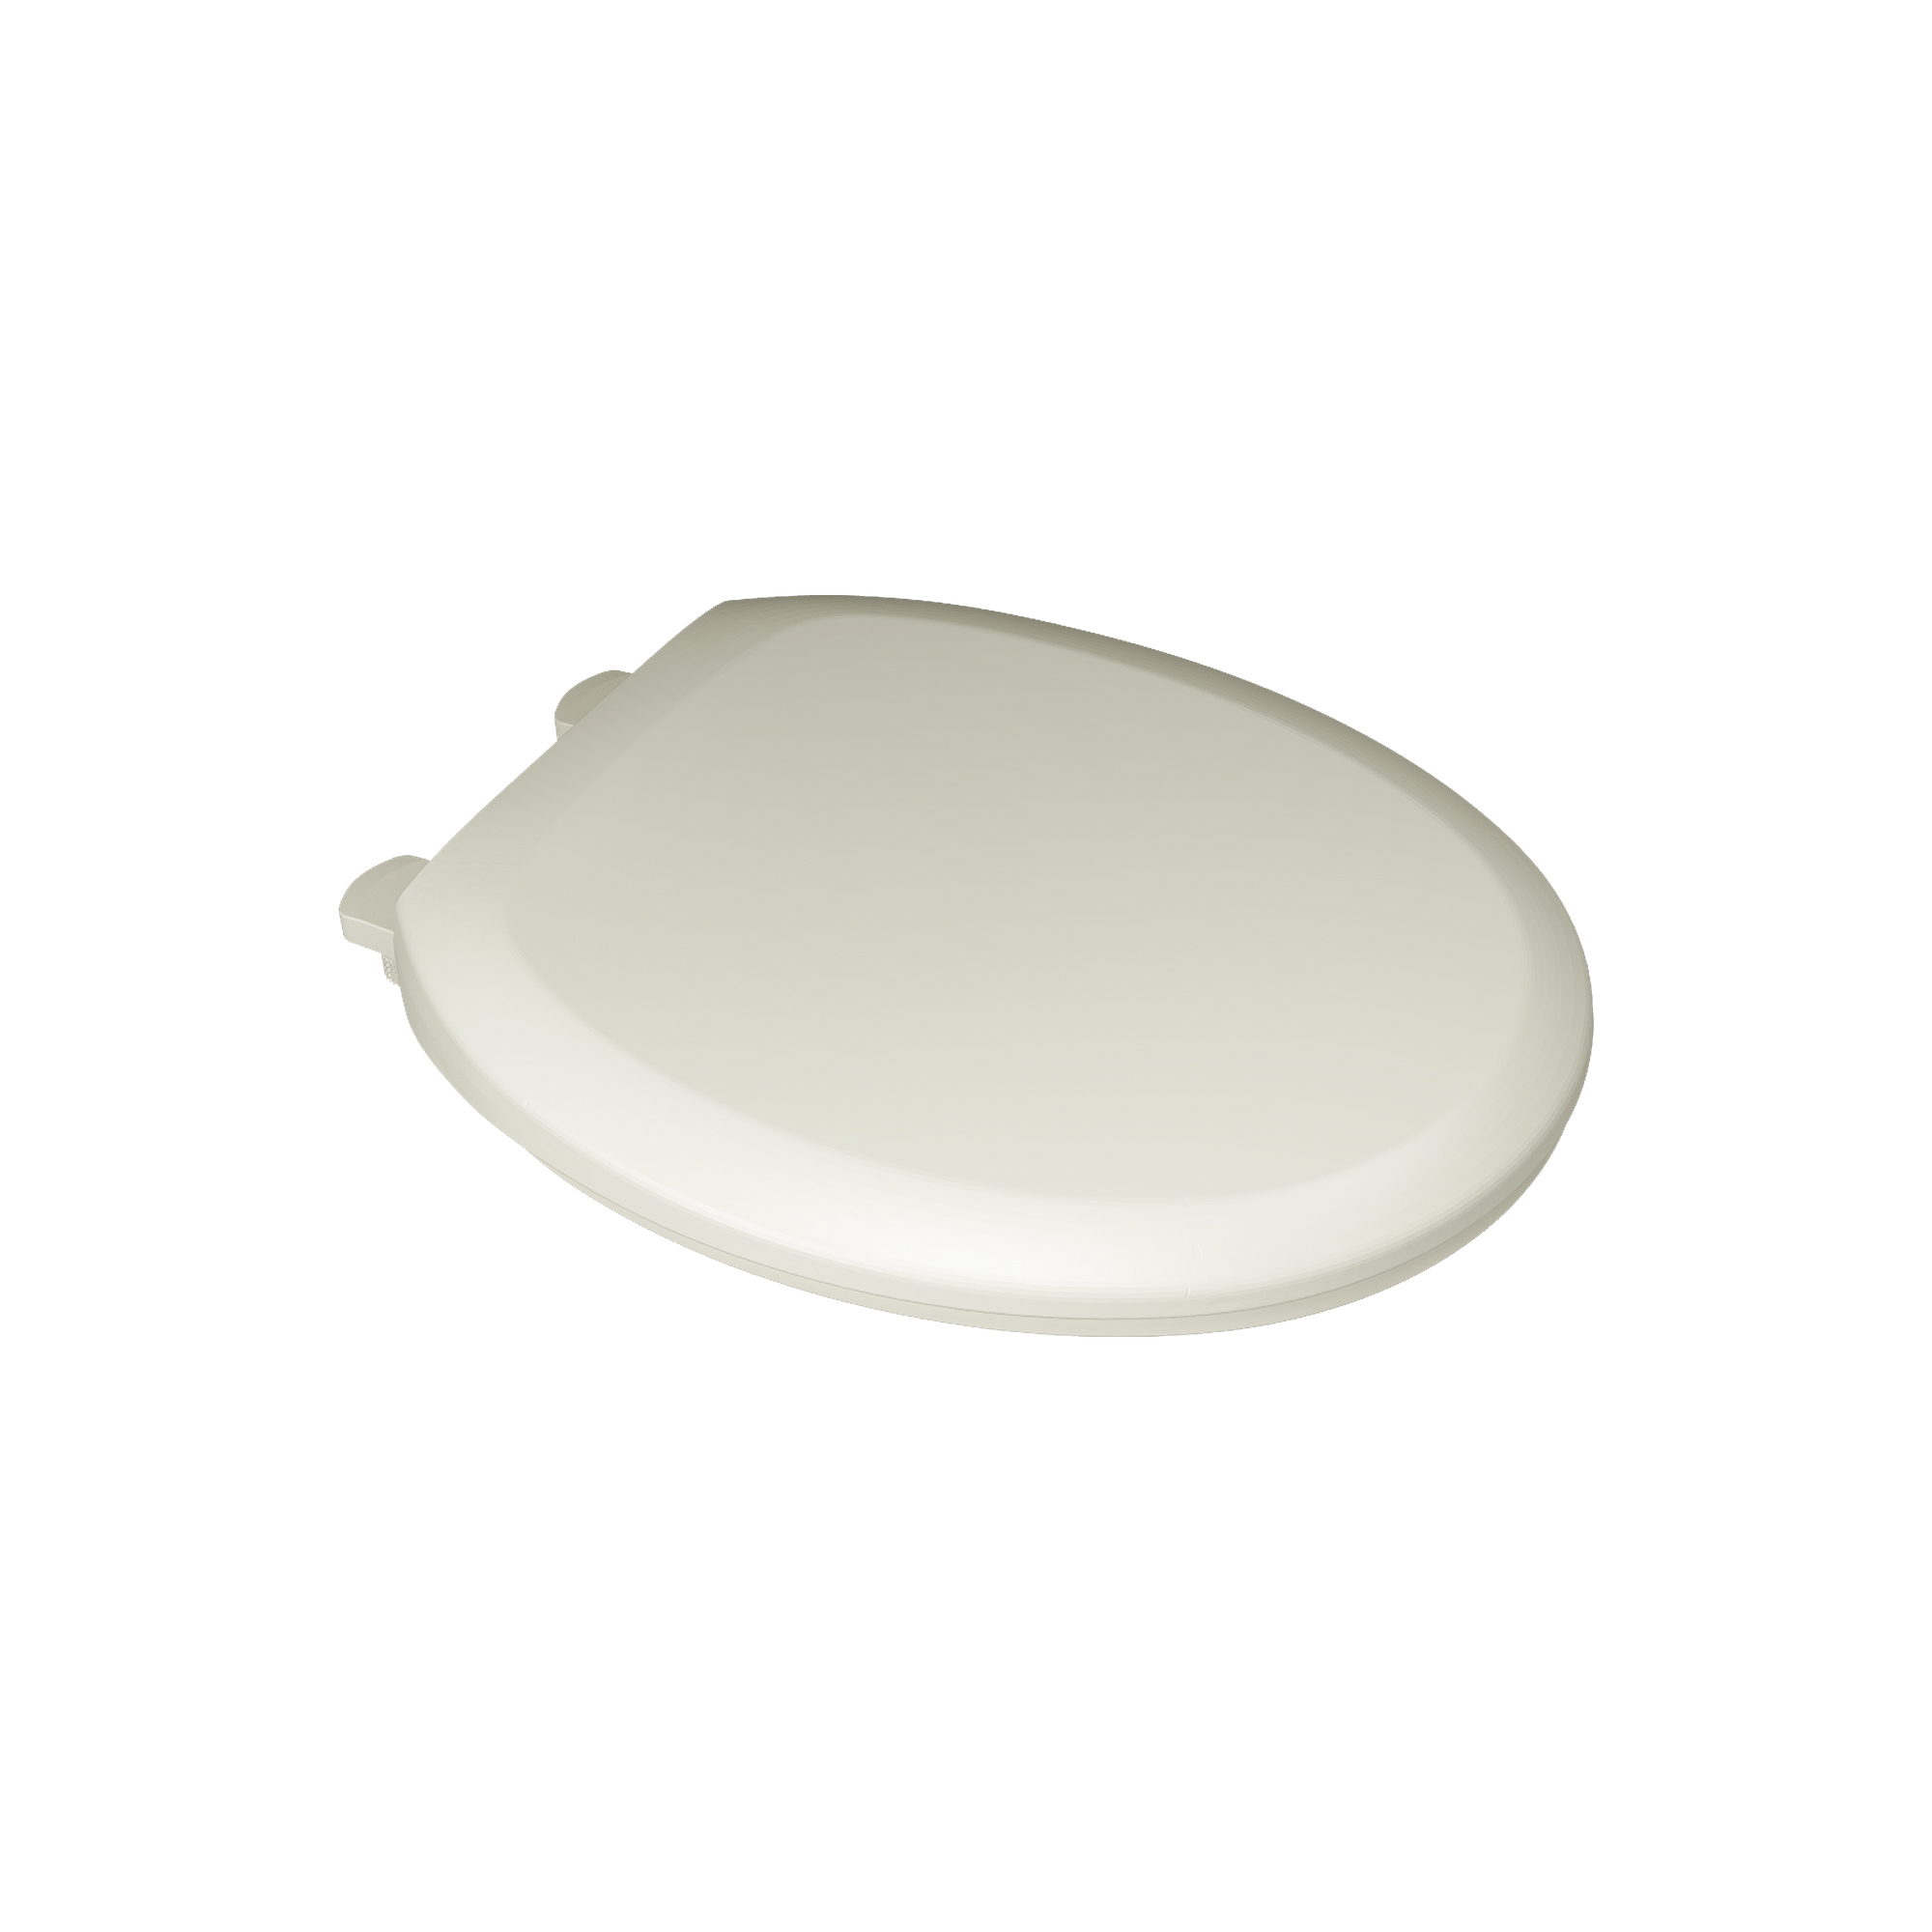 Champion™ Slow-Close & Easy Lift-Off Round Front Toilet Seat